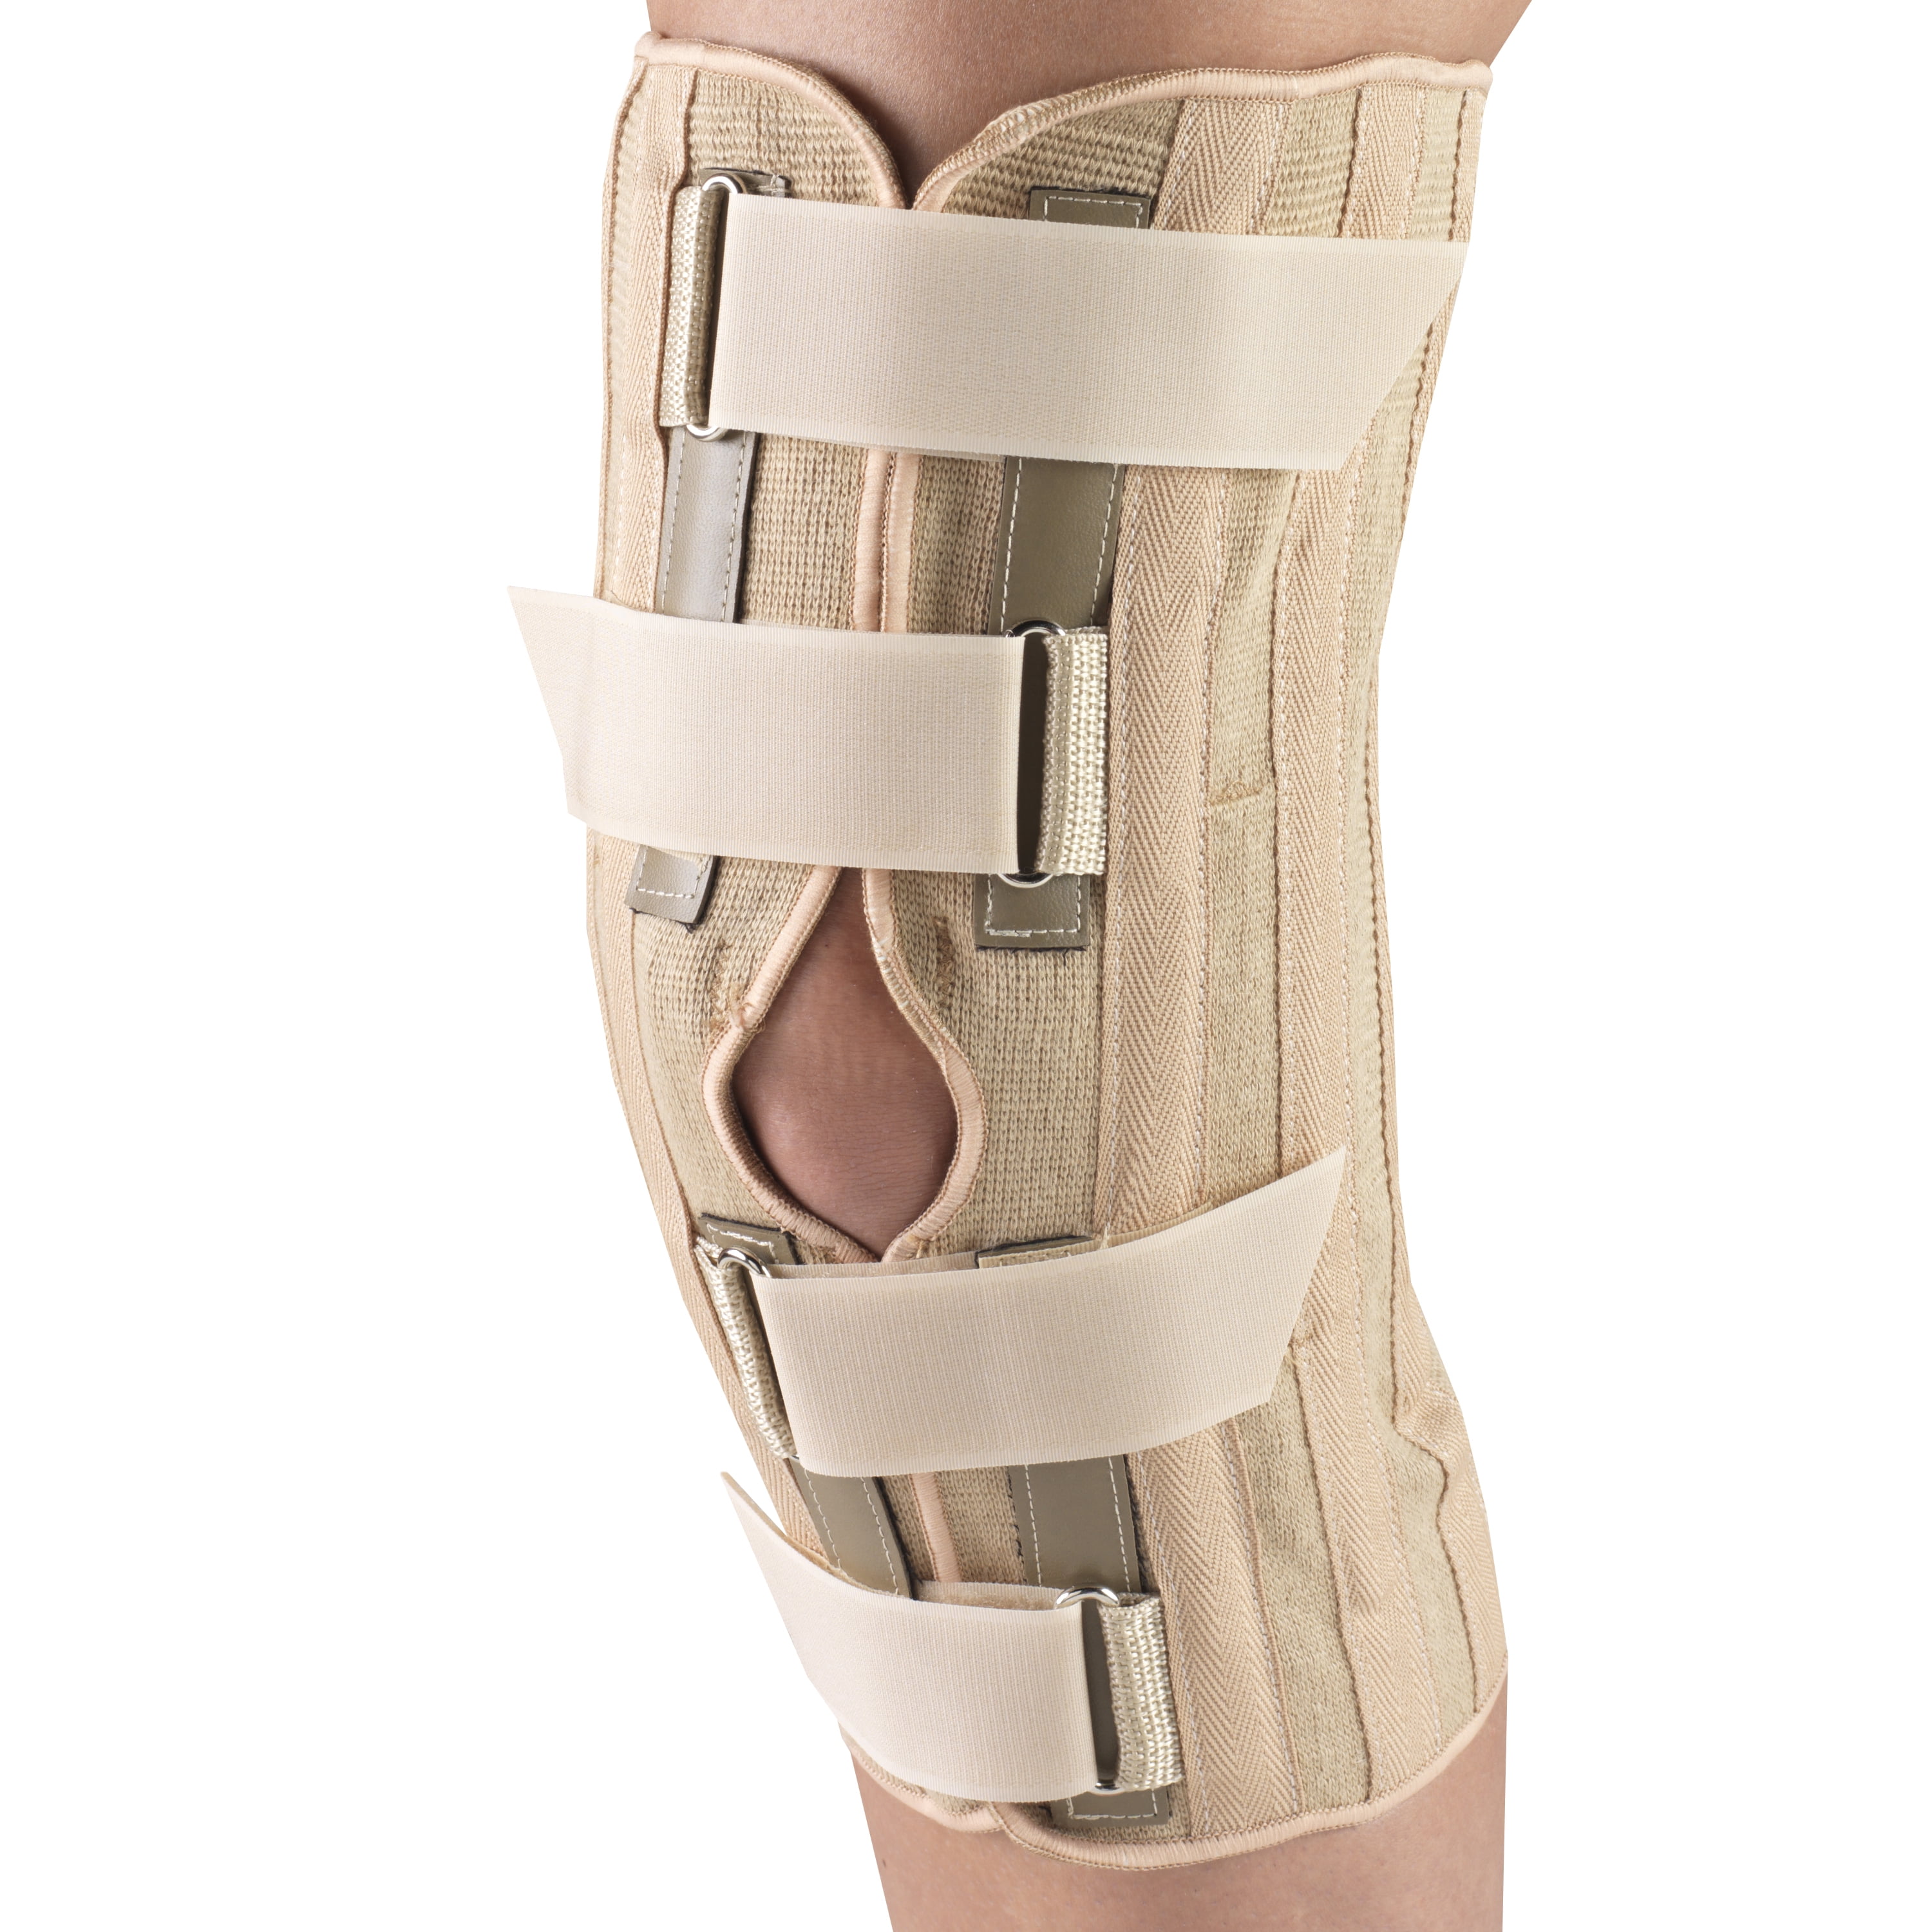 OTC Knee Support with Condyle Pads - Front Opening, Beige, Medium 